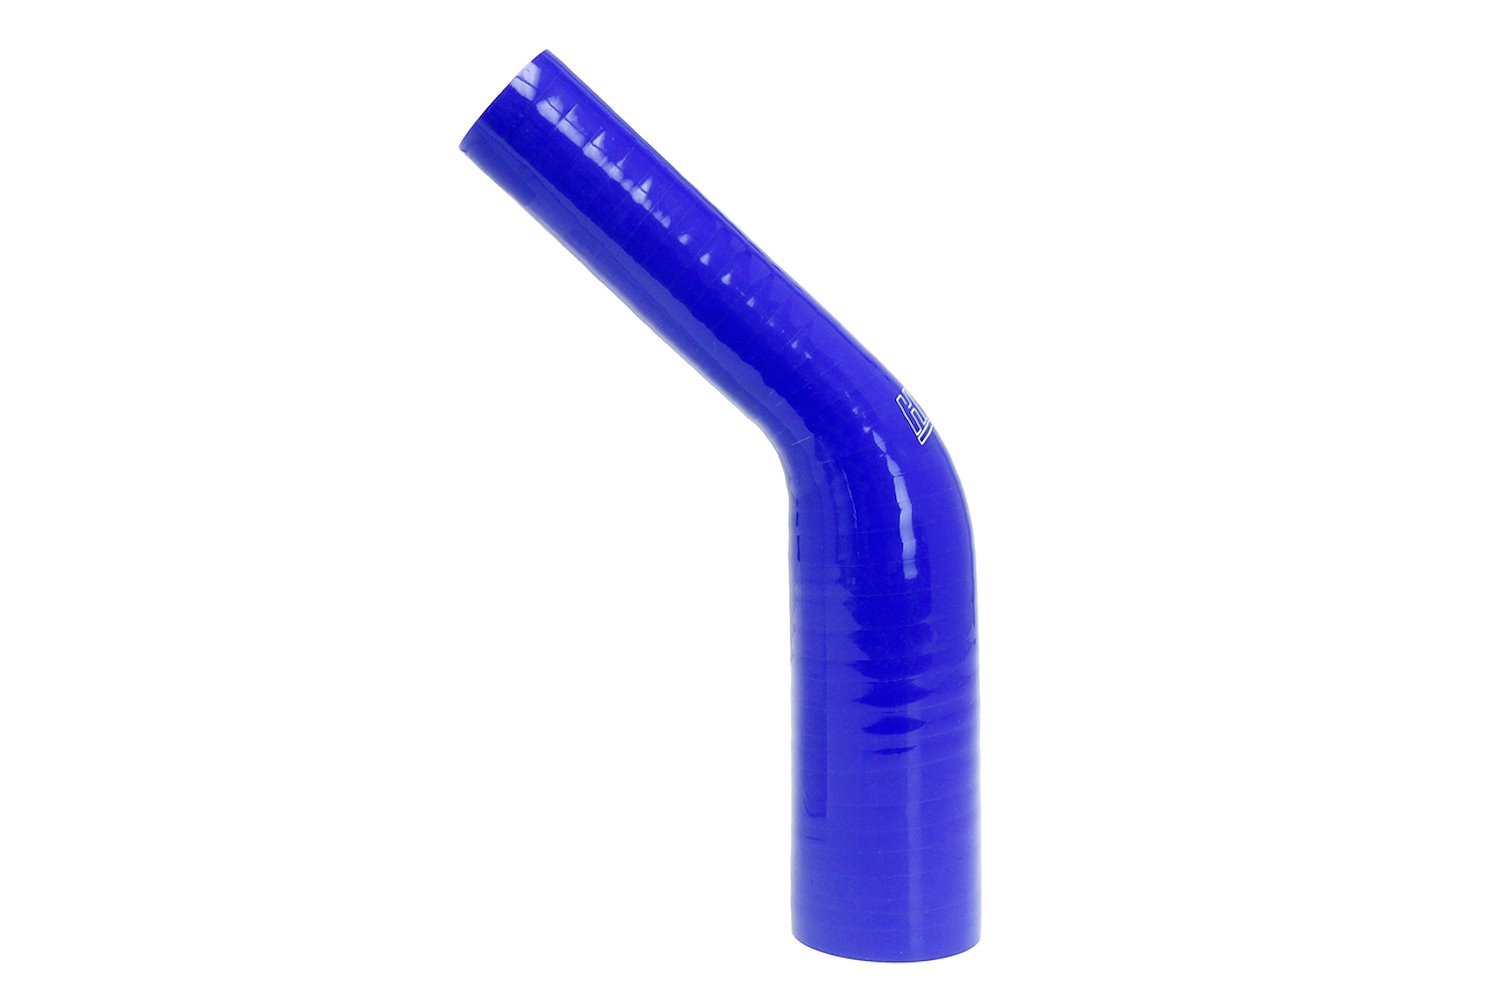 HTSER45-075-100-BLUE Silicone 45-Degree Elbow Hose, High-Temp 4-Ply Reinforced, 3/4 in. - 1 in. ID, Blue